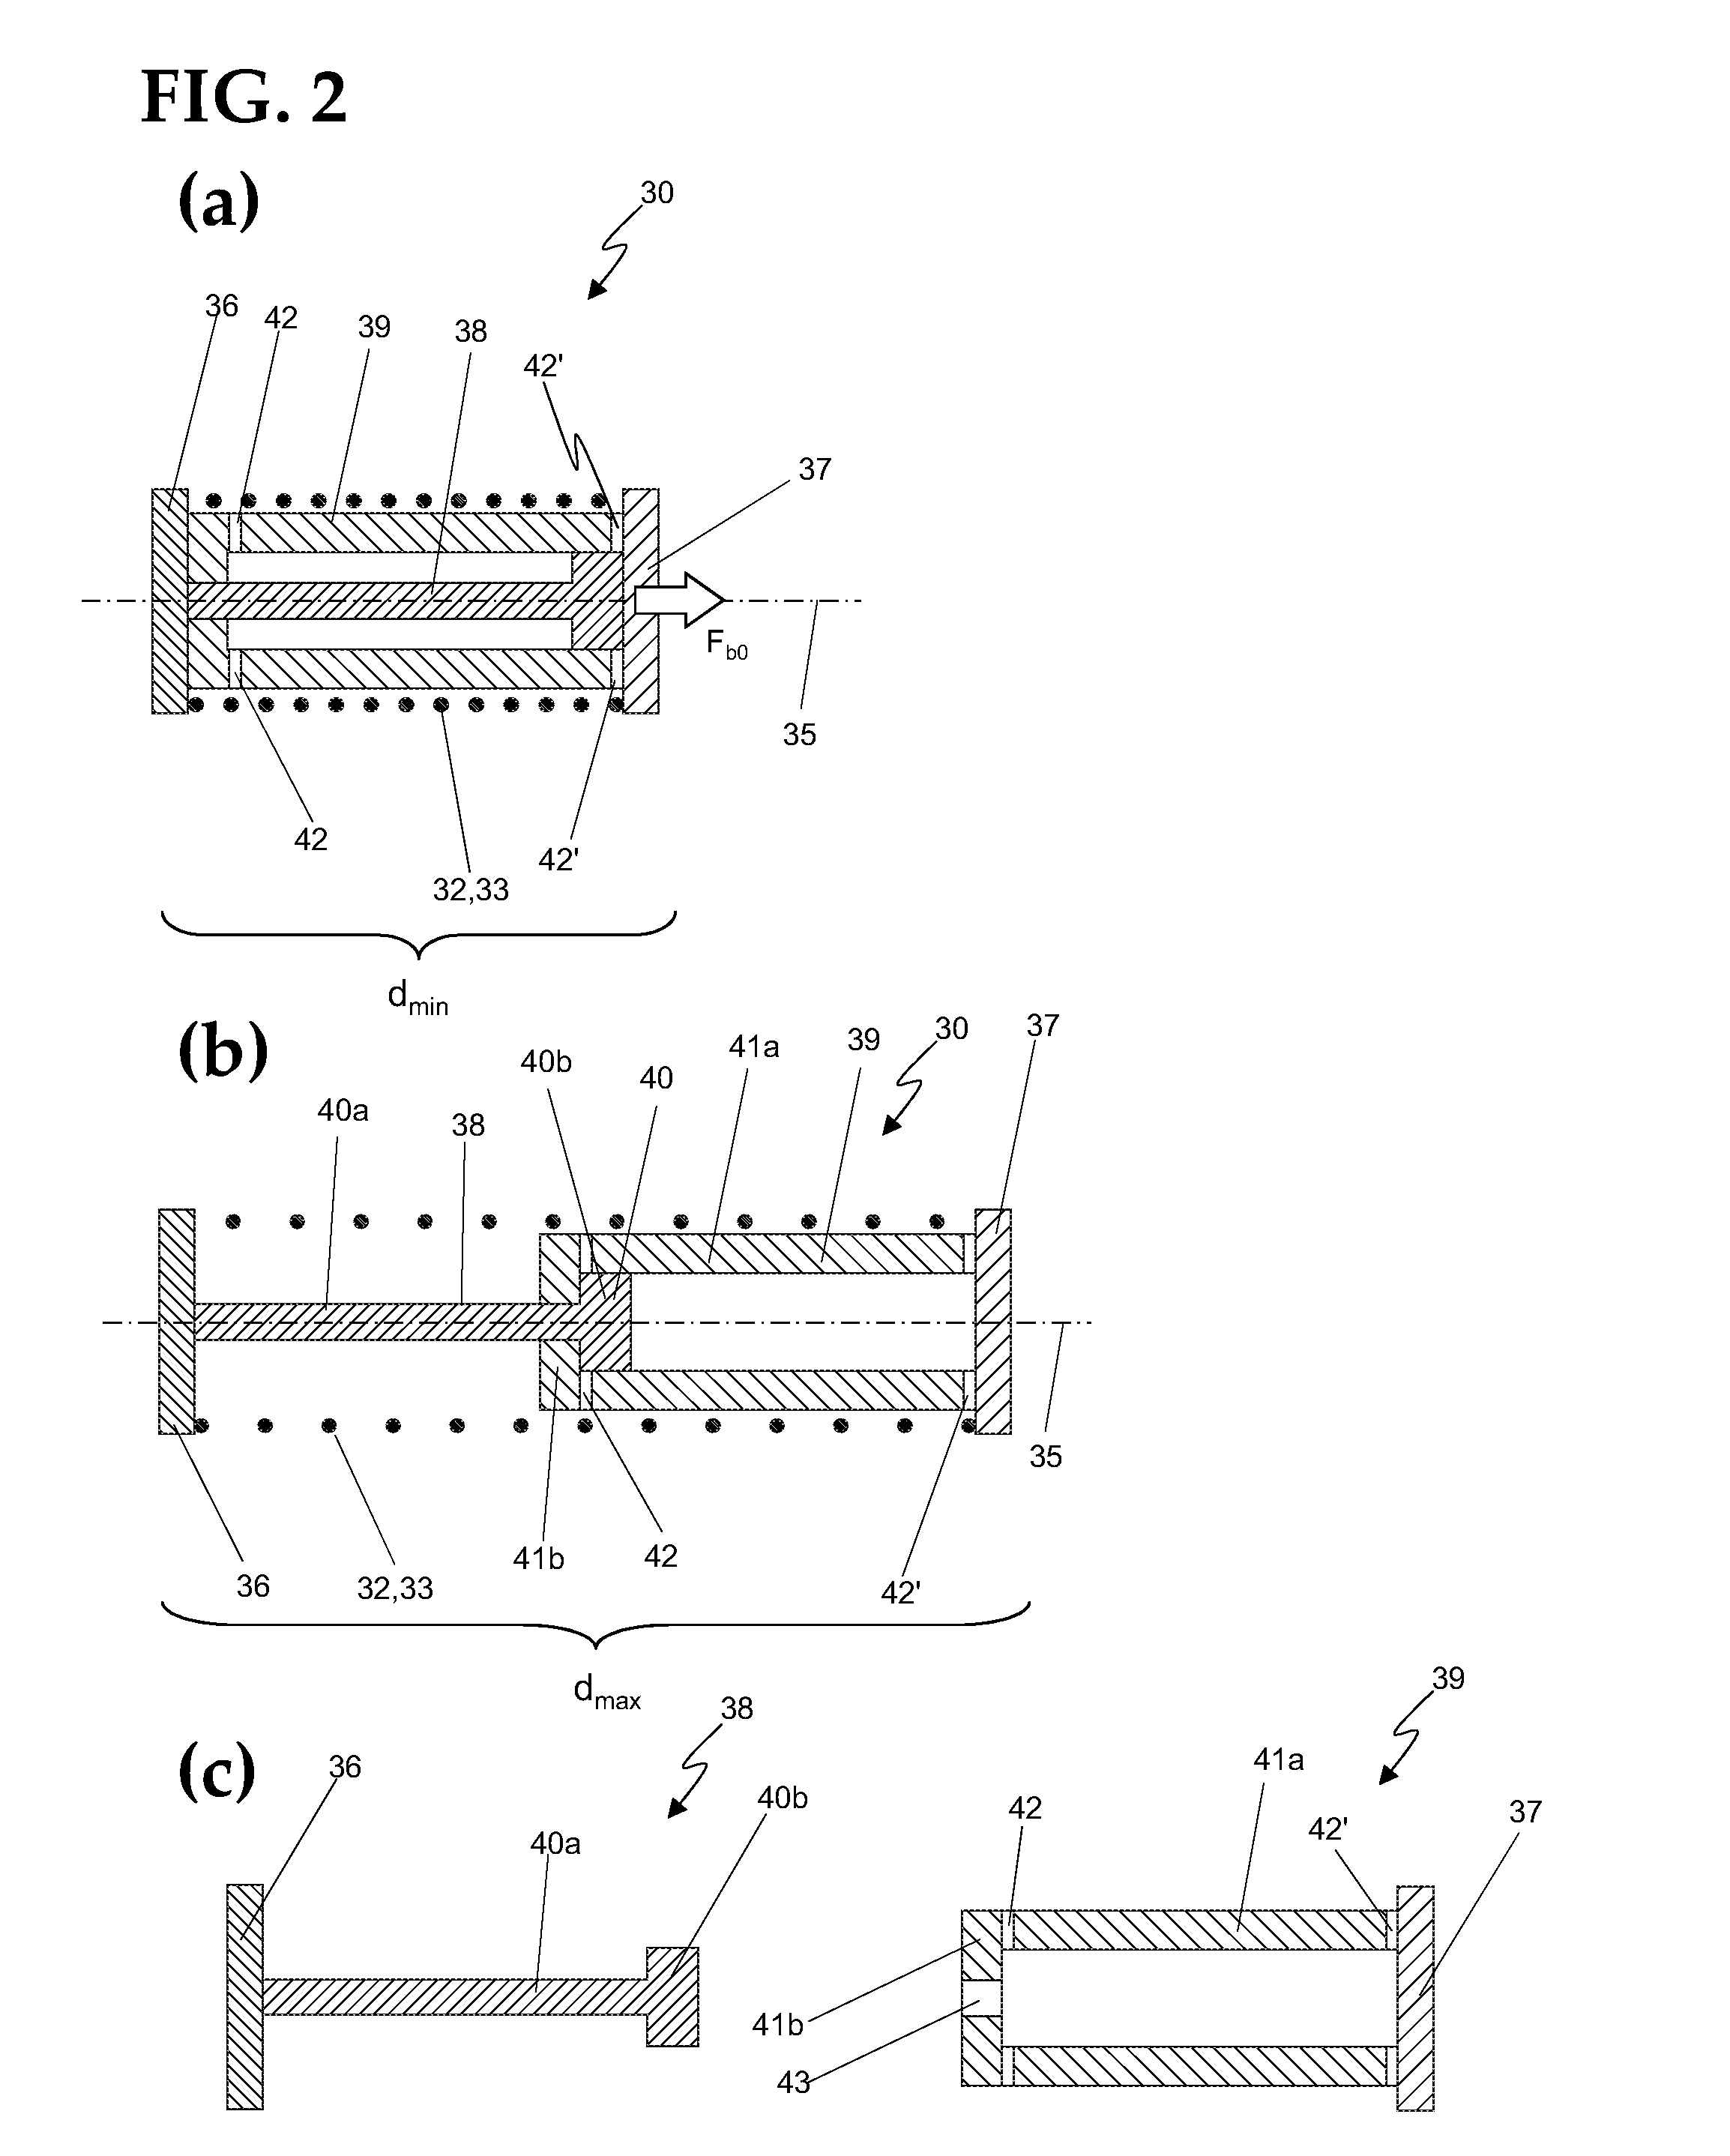 Spring force assembly for biasing or actuating stoppers of syringes, injection pen cartridges and the like